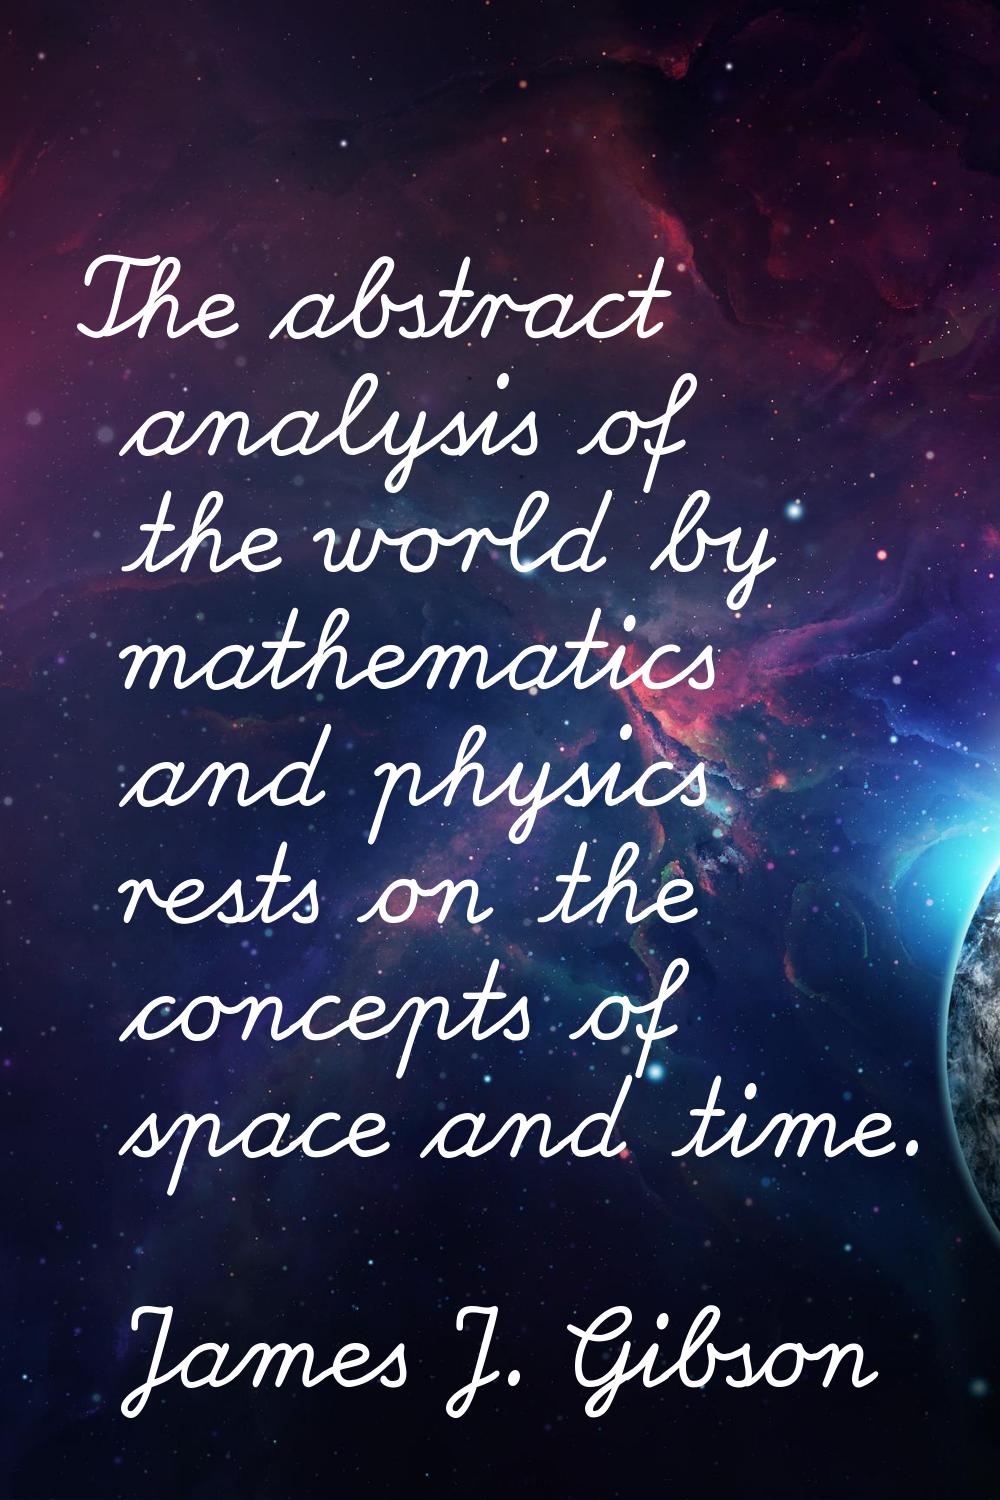 The abstract analysis of the world by mathematics and physics rests on the concepts of space and ti